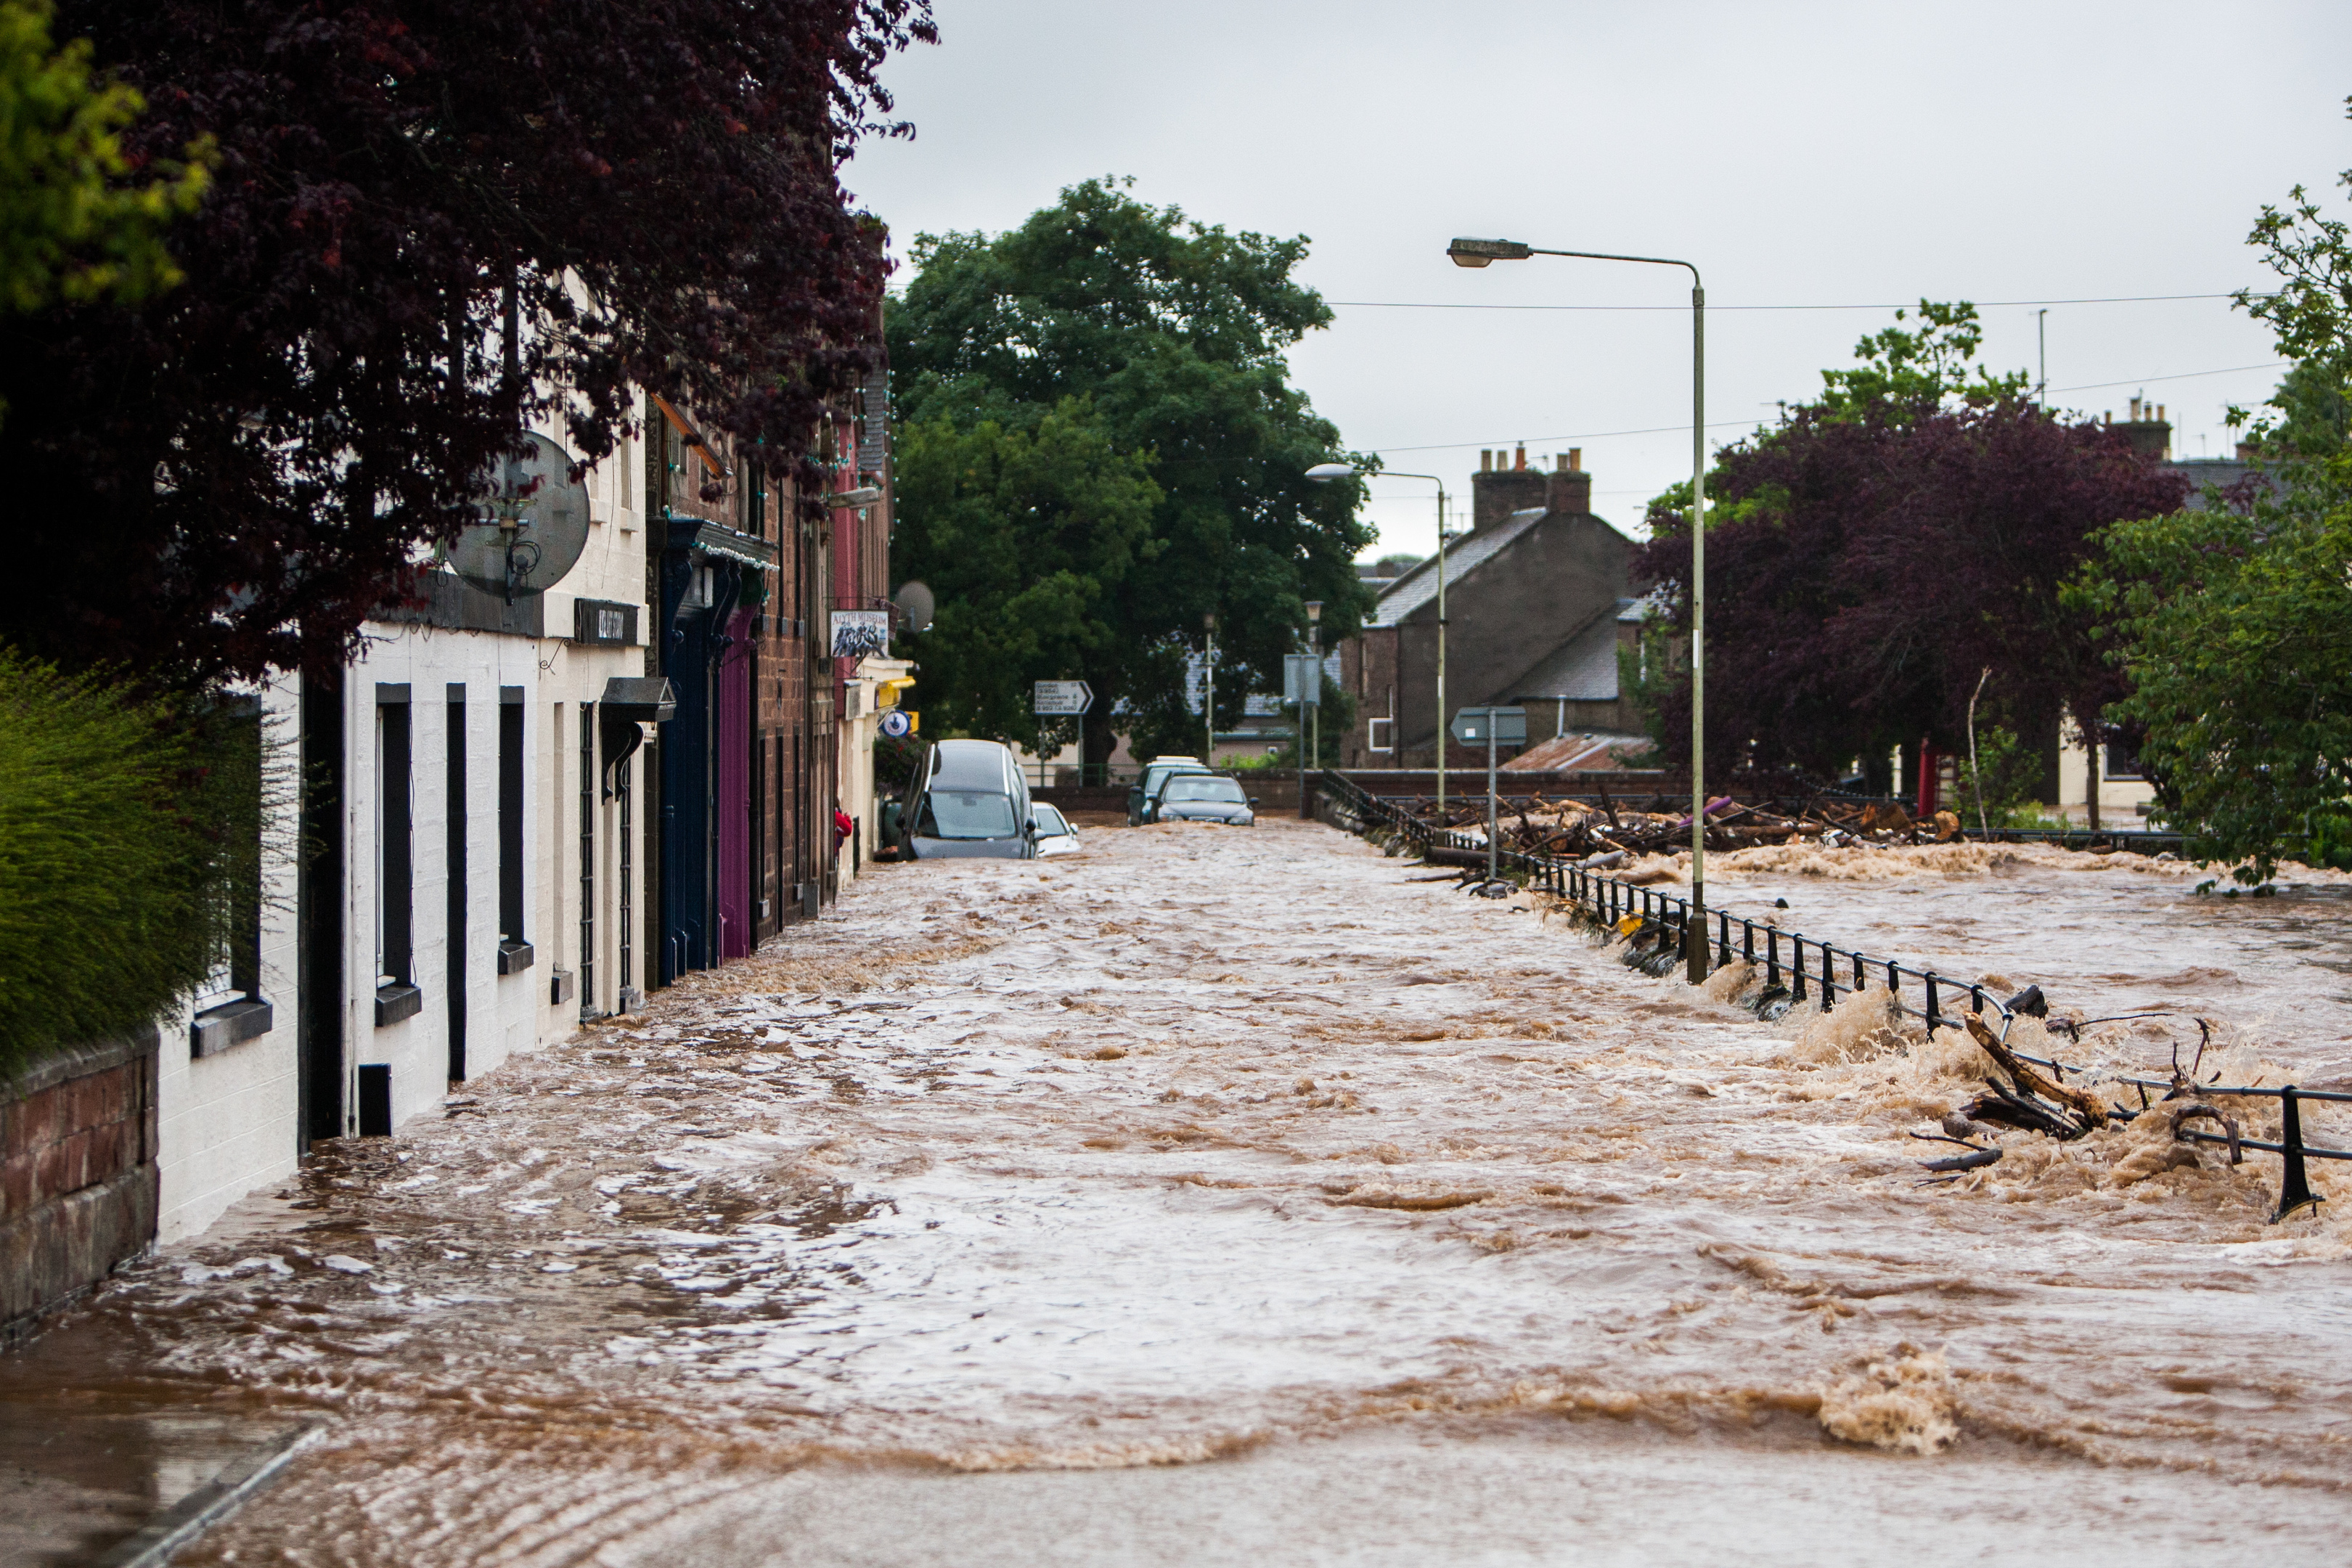 Alyth Square during the flood